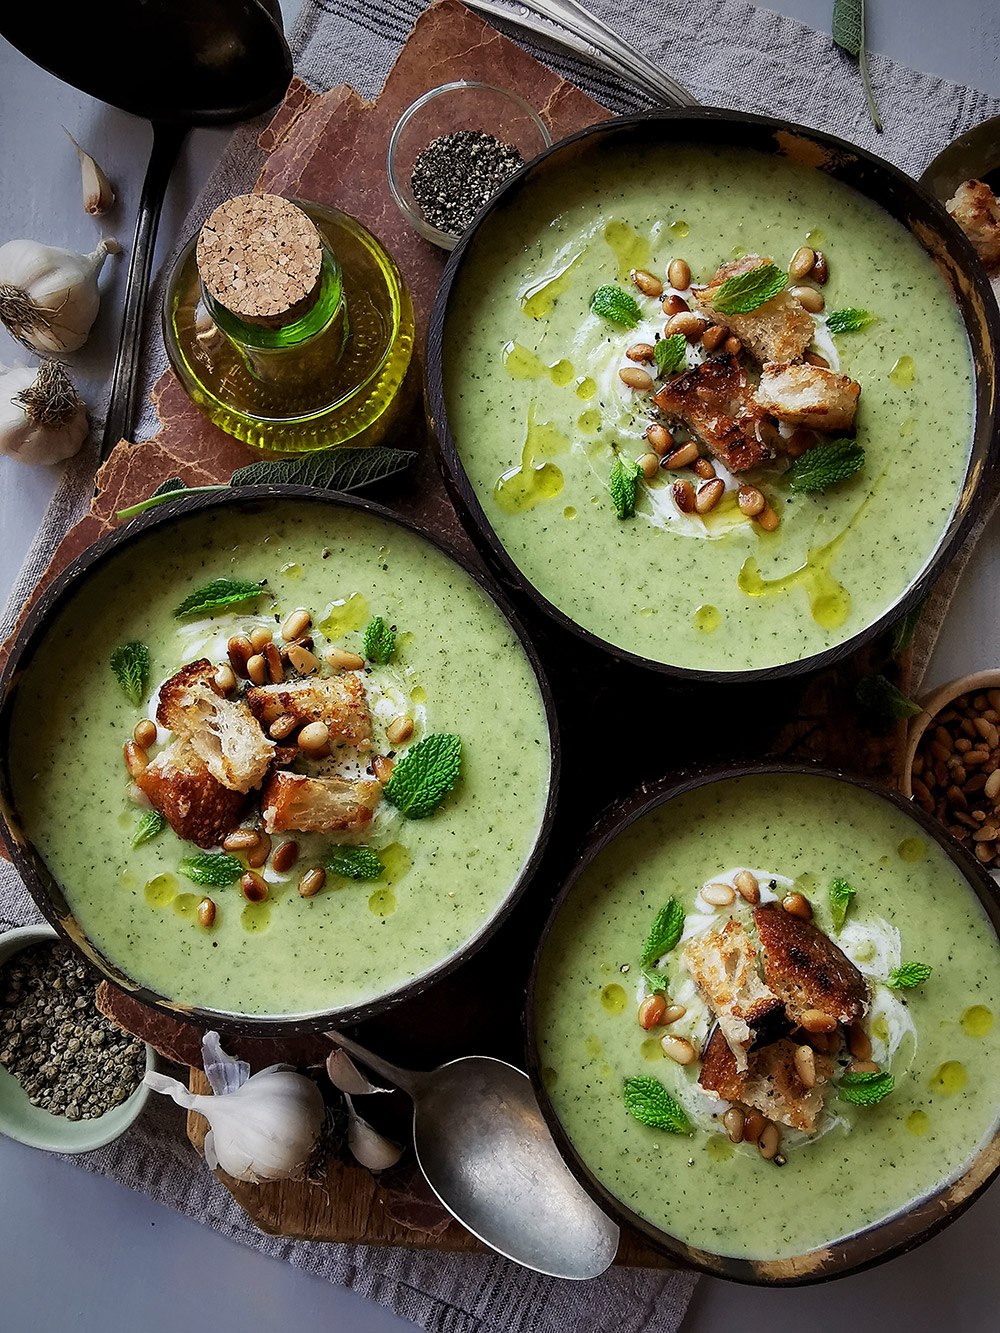 Roasted courgette cream soup